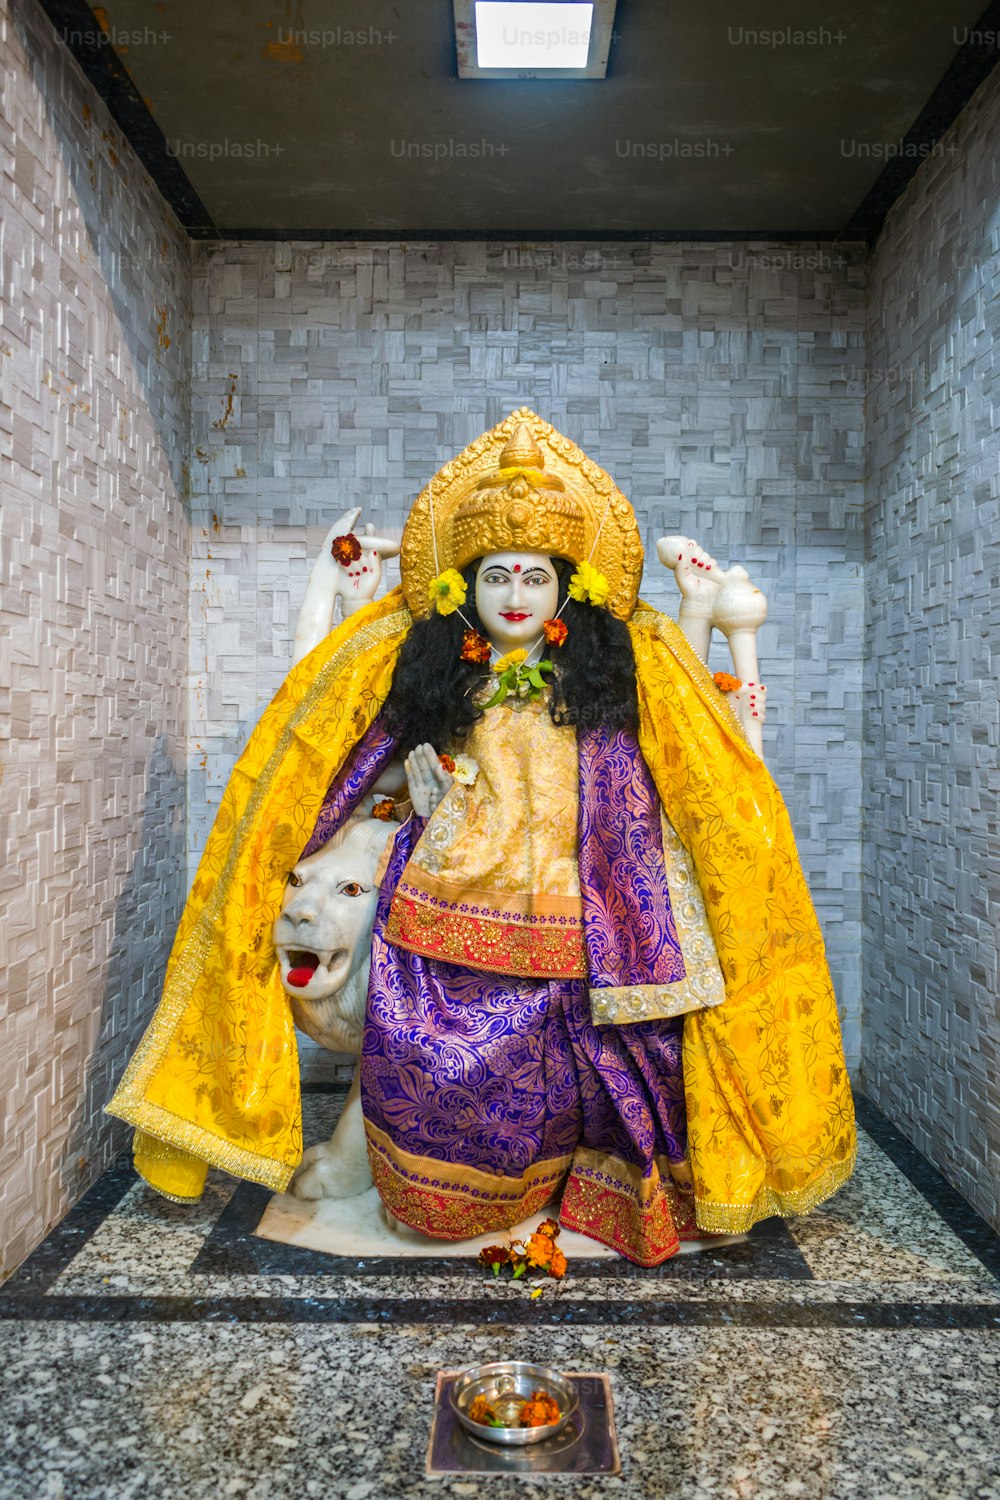 a statue of a woman in a yellow and purple outfit